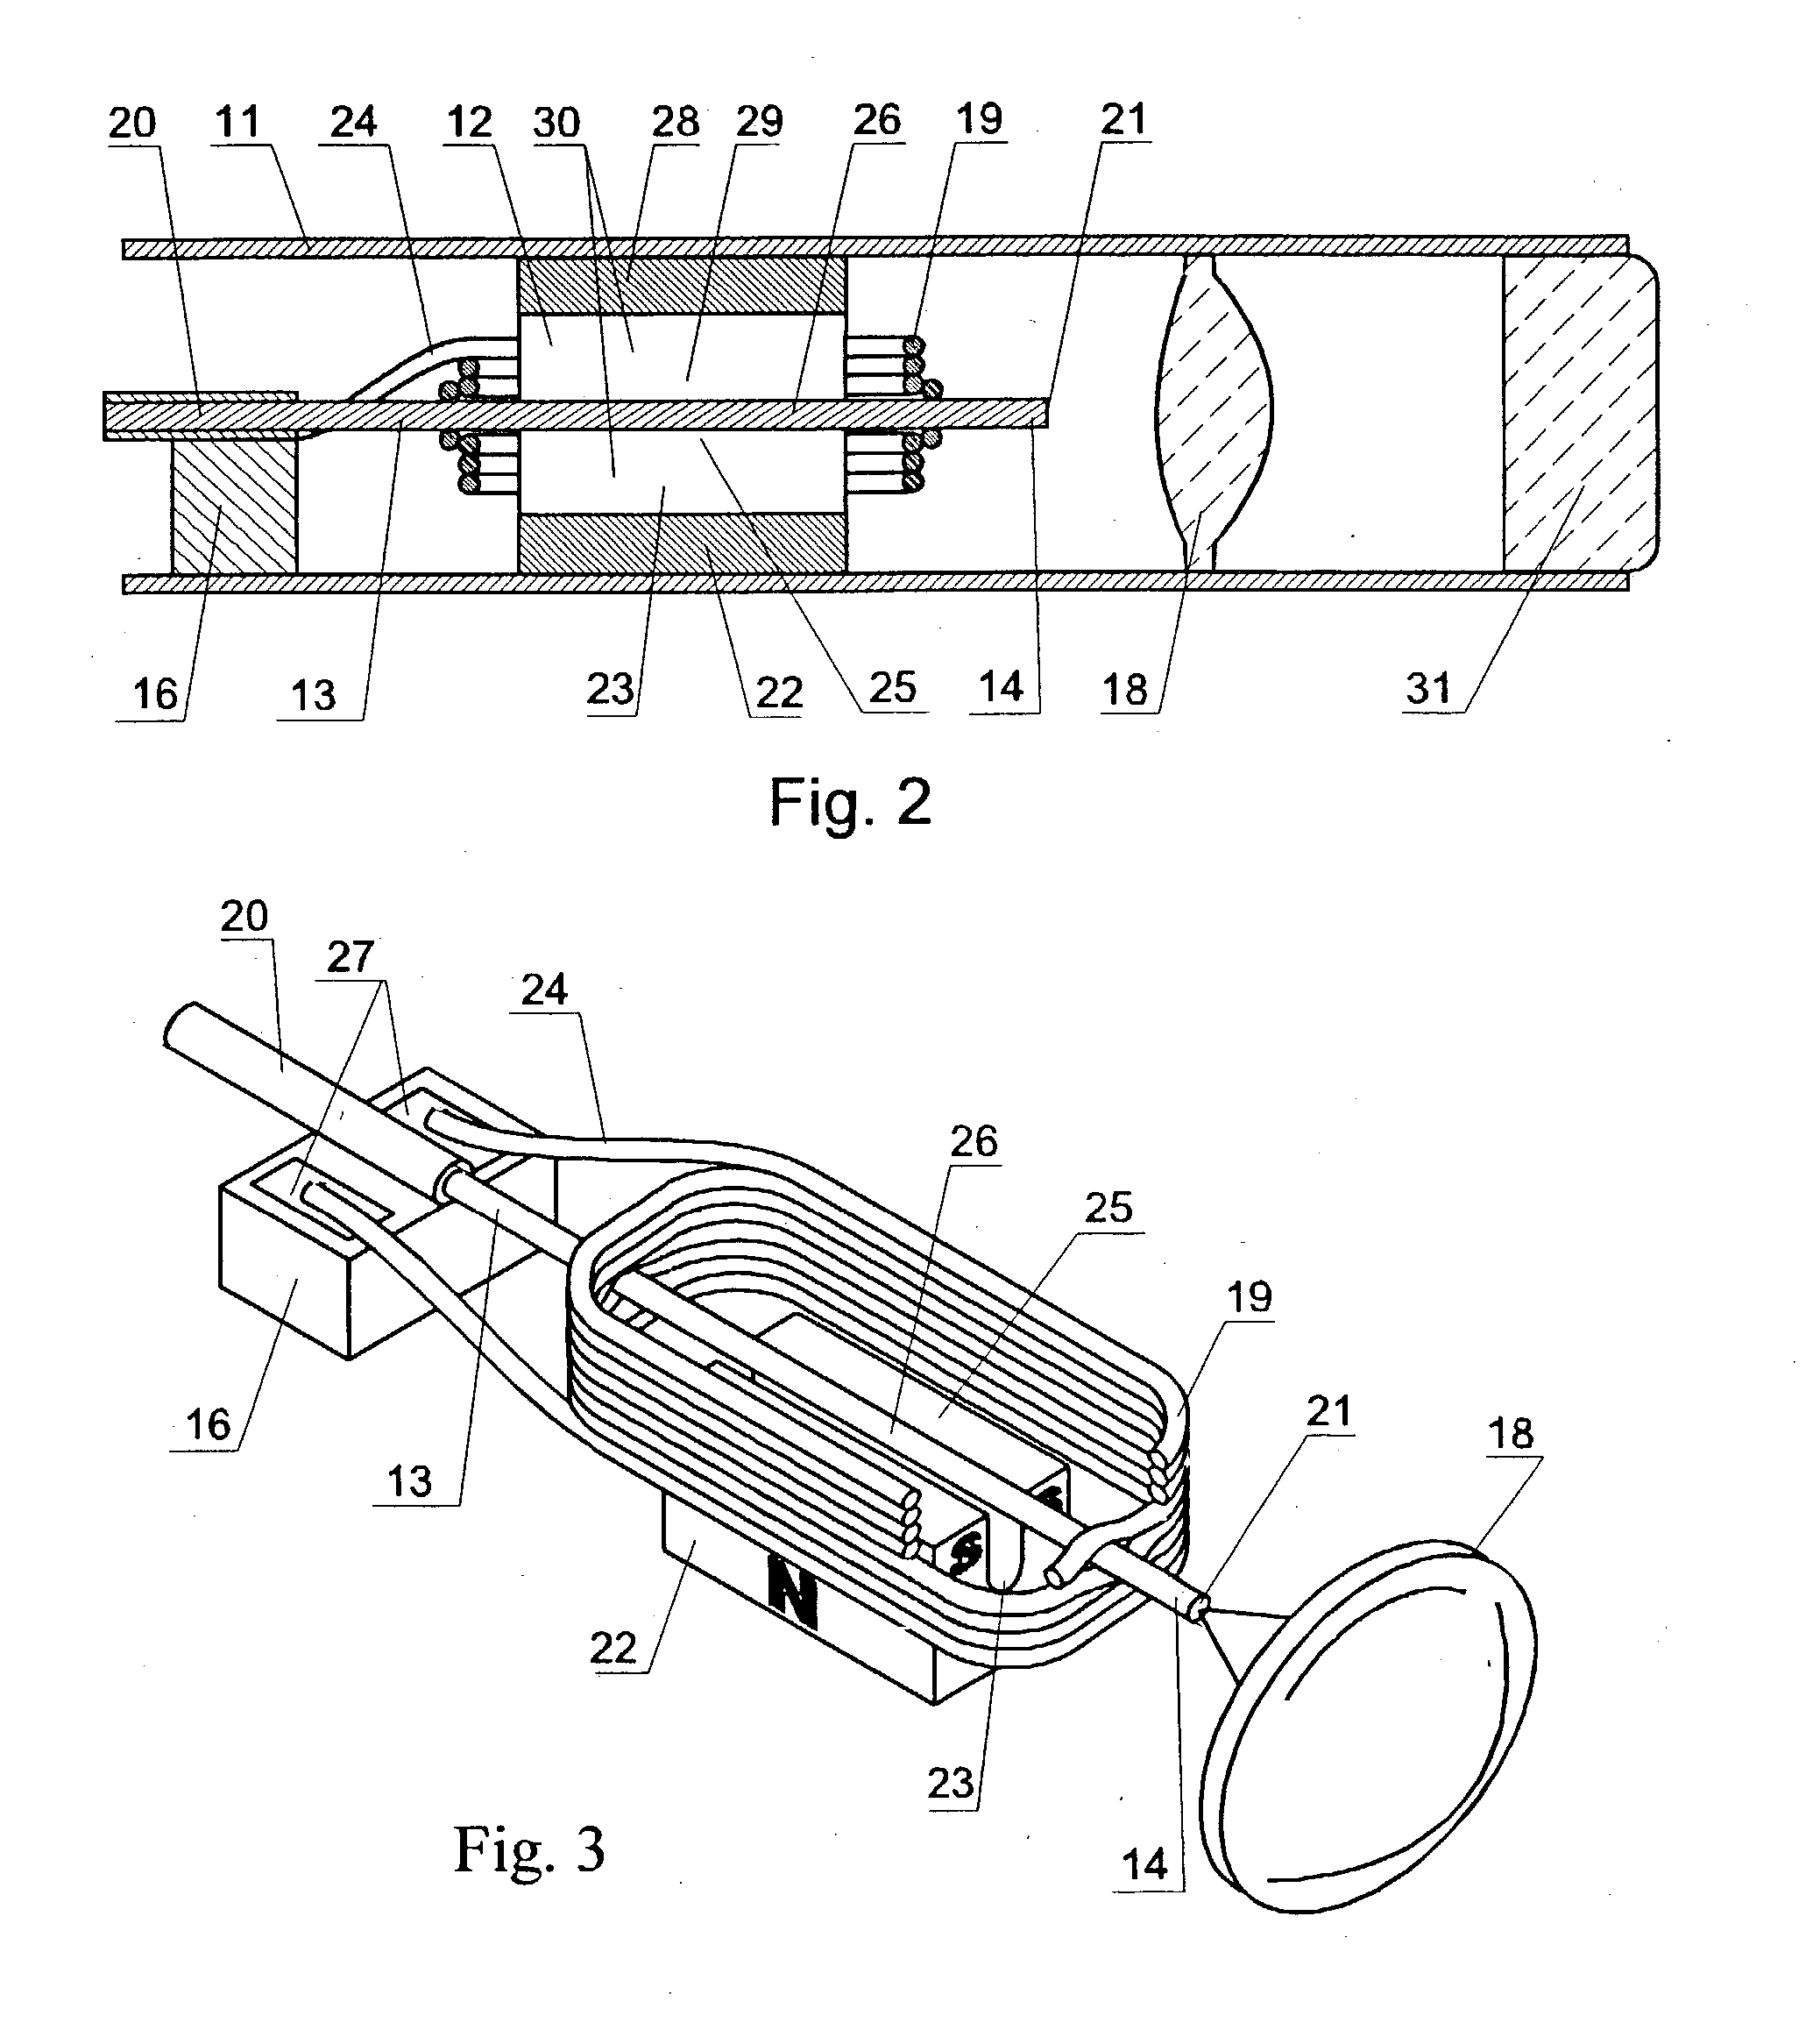 Optical coherence tomography apparatus, optical fiber lateral scanner and a method for studying biological tissues in vivo